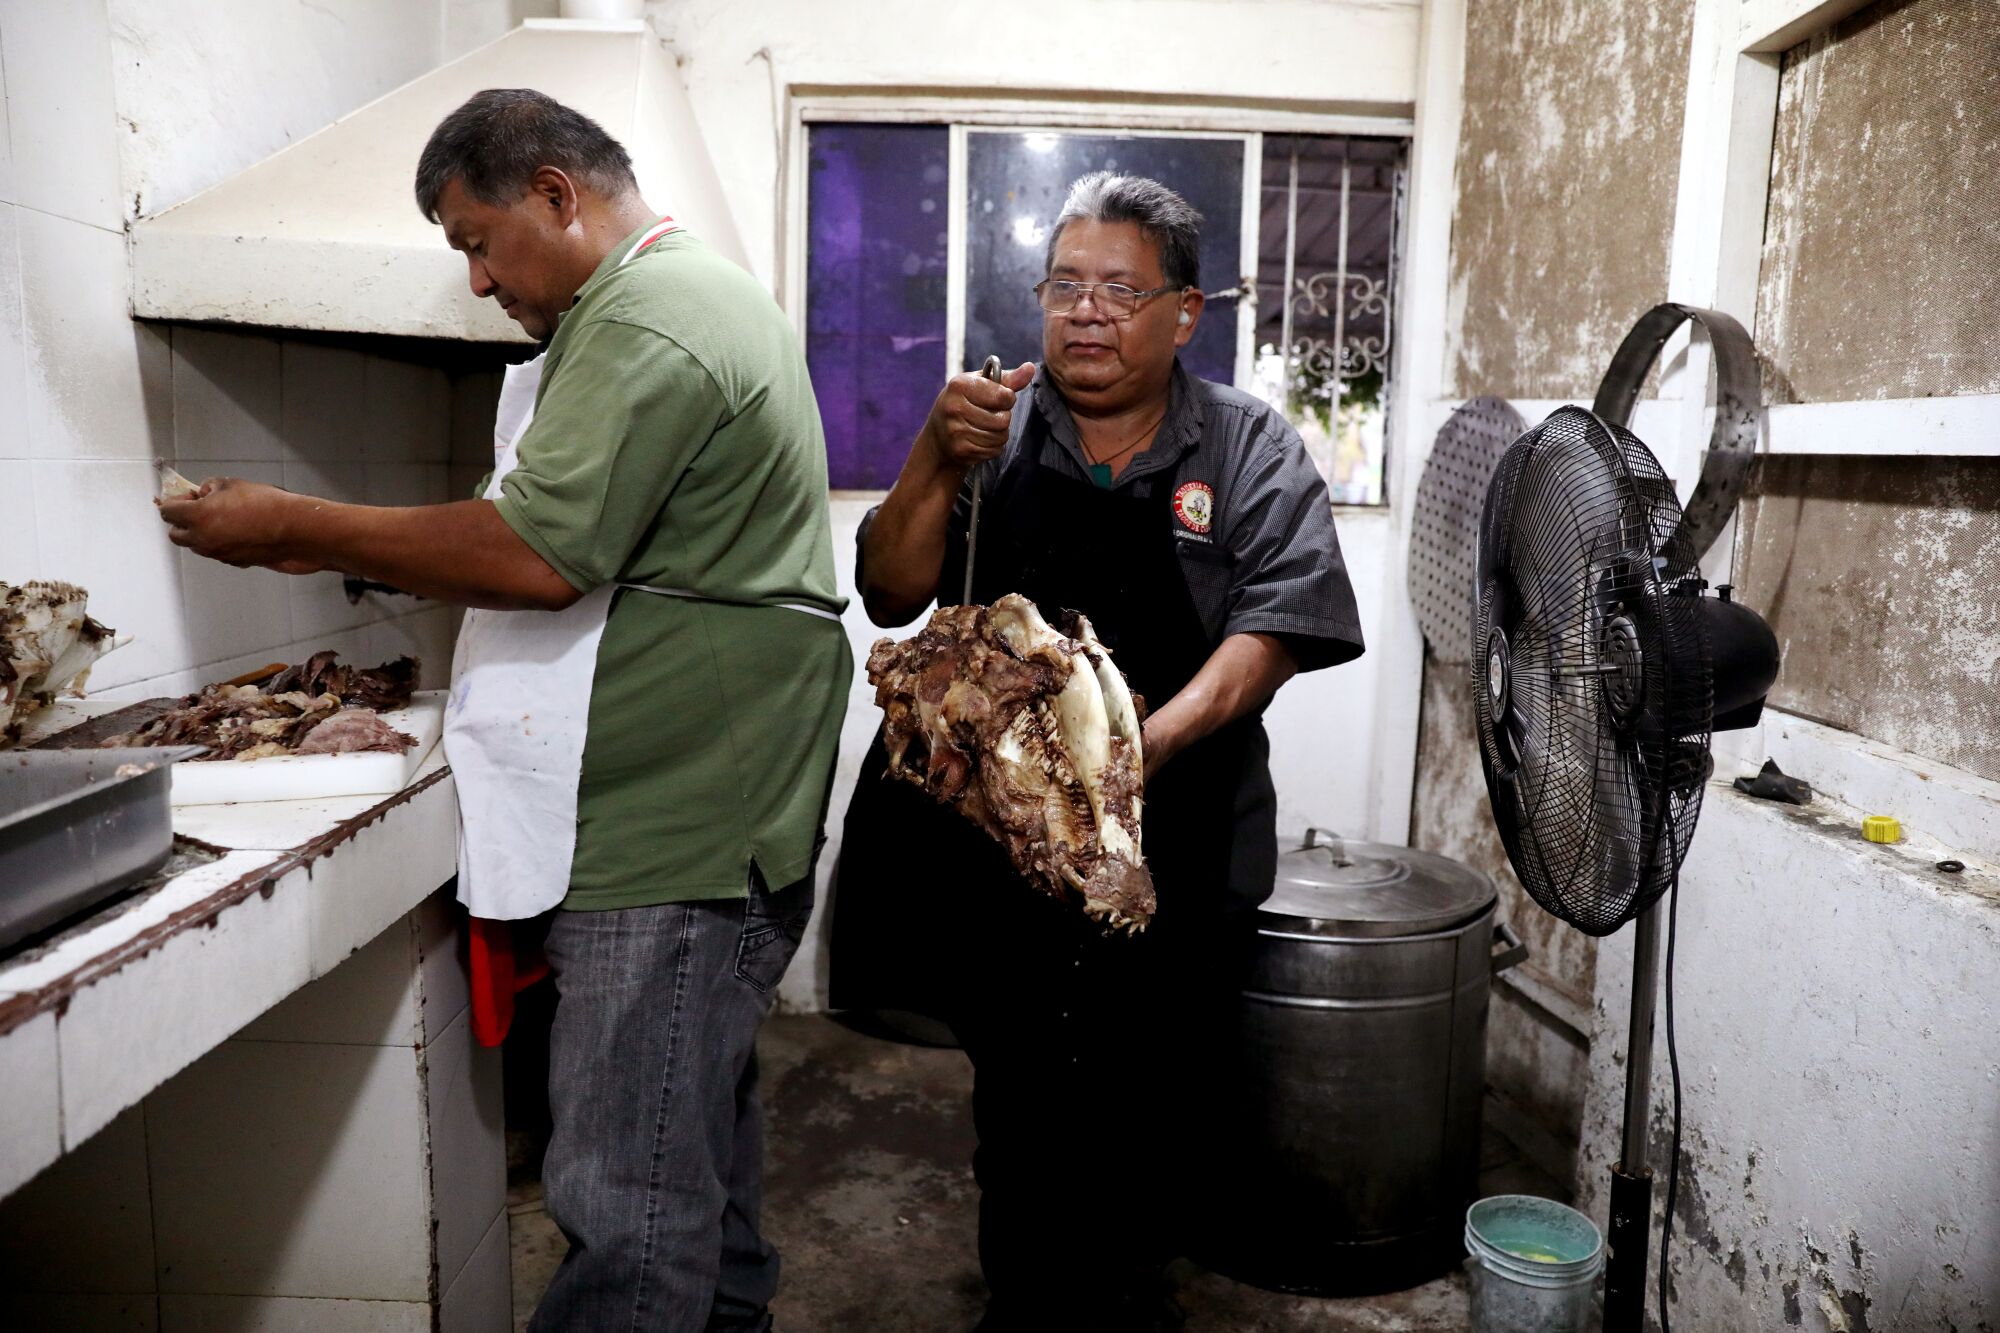 Rosendo Godinez, left, and his brother Cesar Godinez, remove the meat from cooked cows heads.